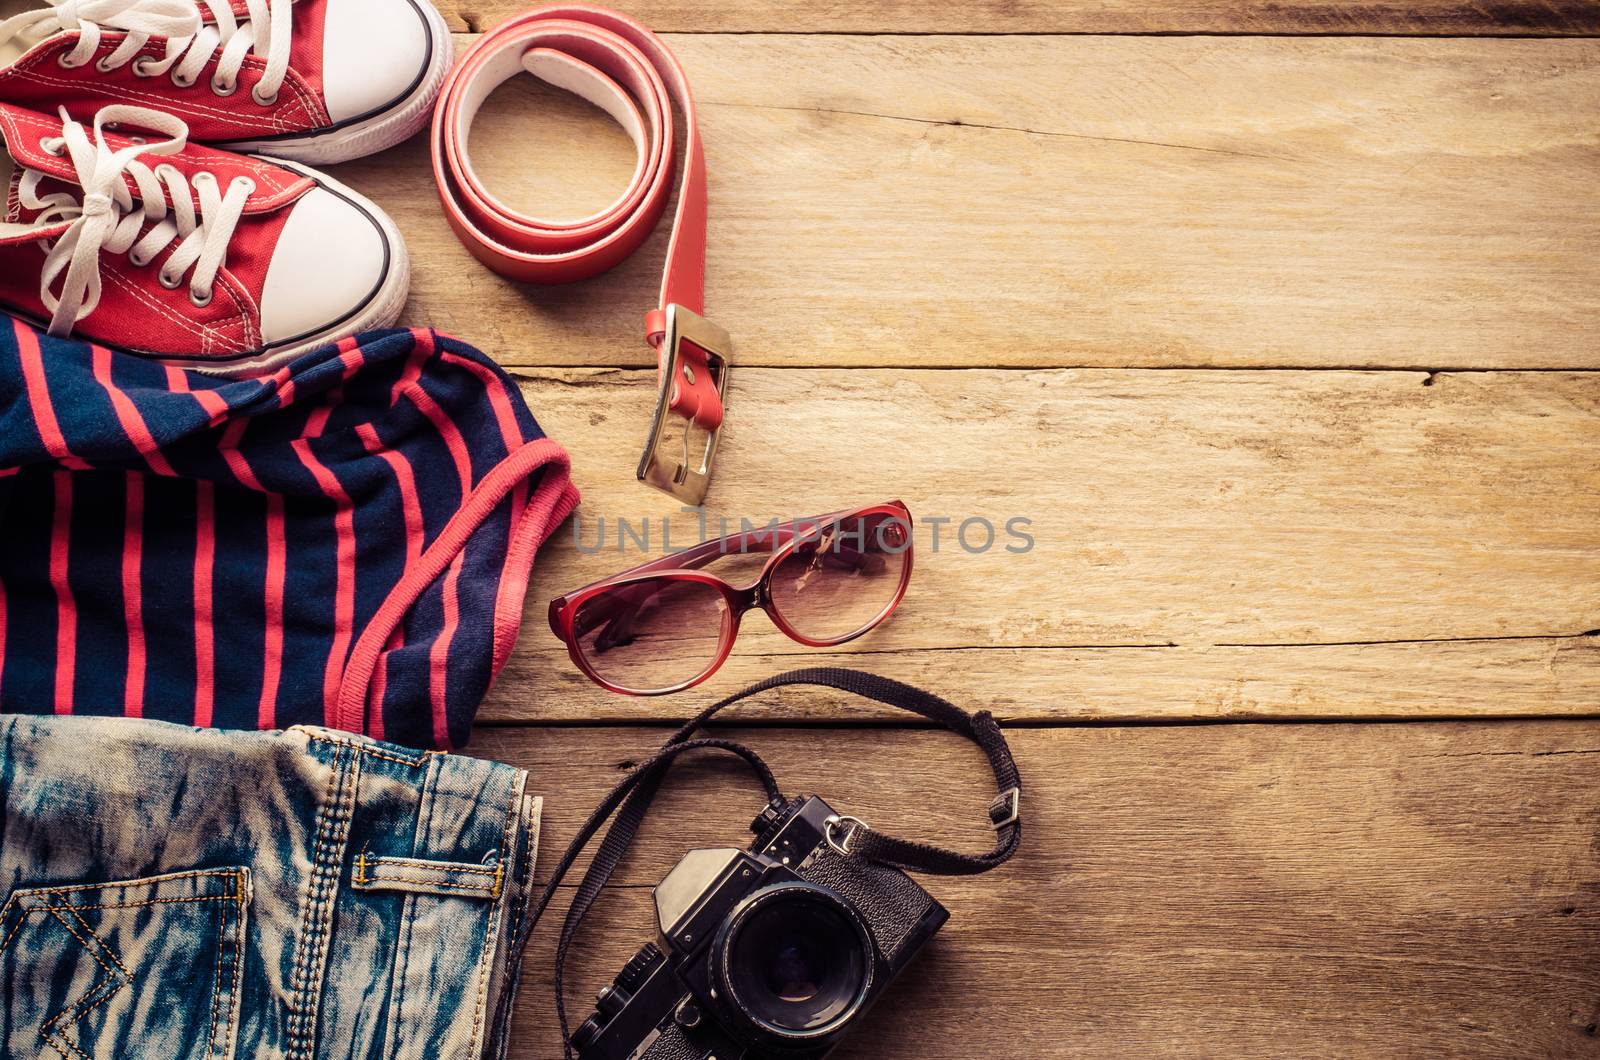 Travel accessories and costume on wooden floor